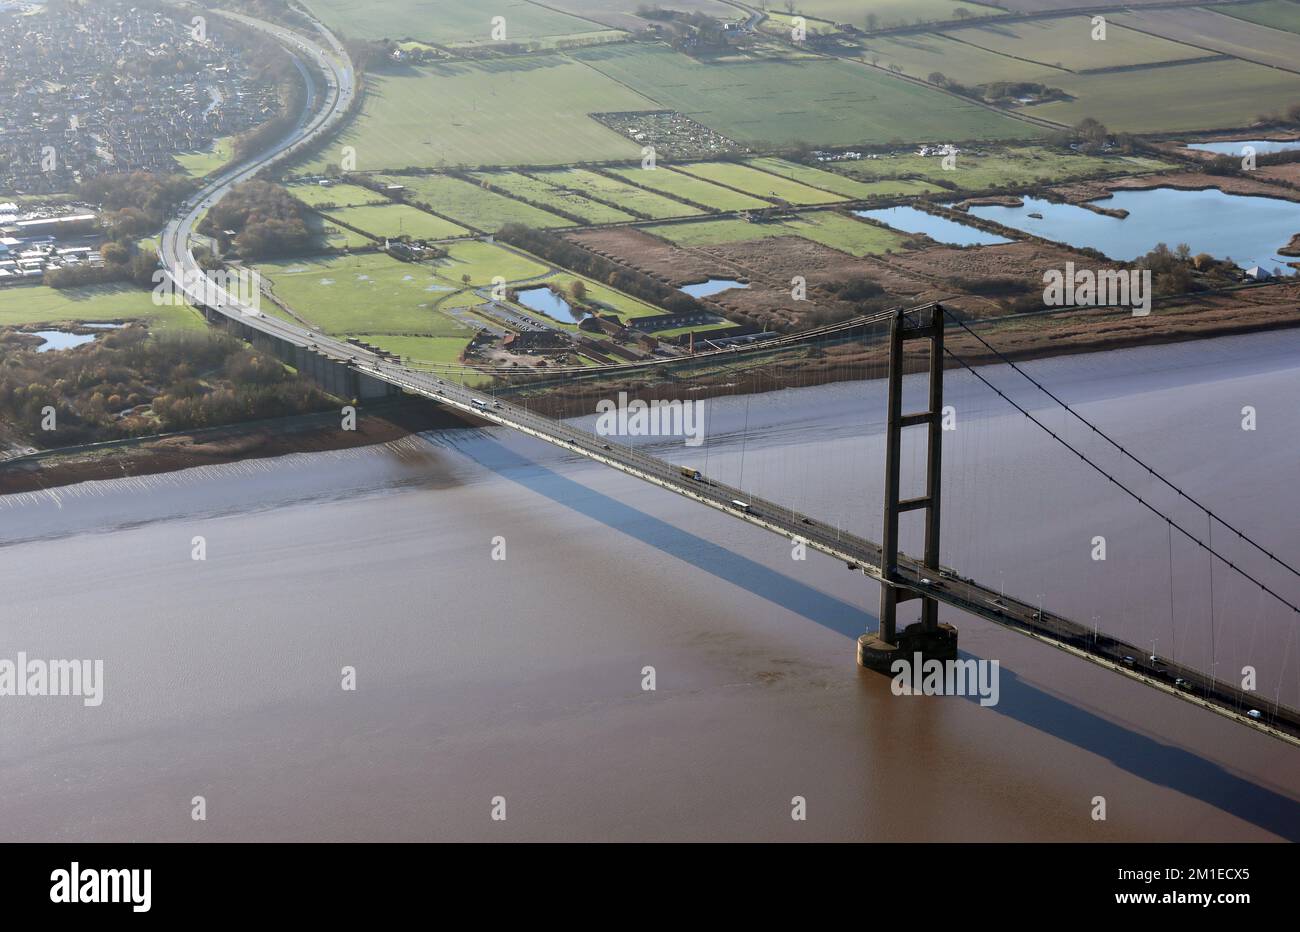 aerial view of the South tower of The Humber Bridge in Lincolnshire, UK Stock Photo